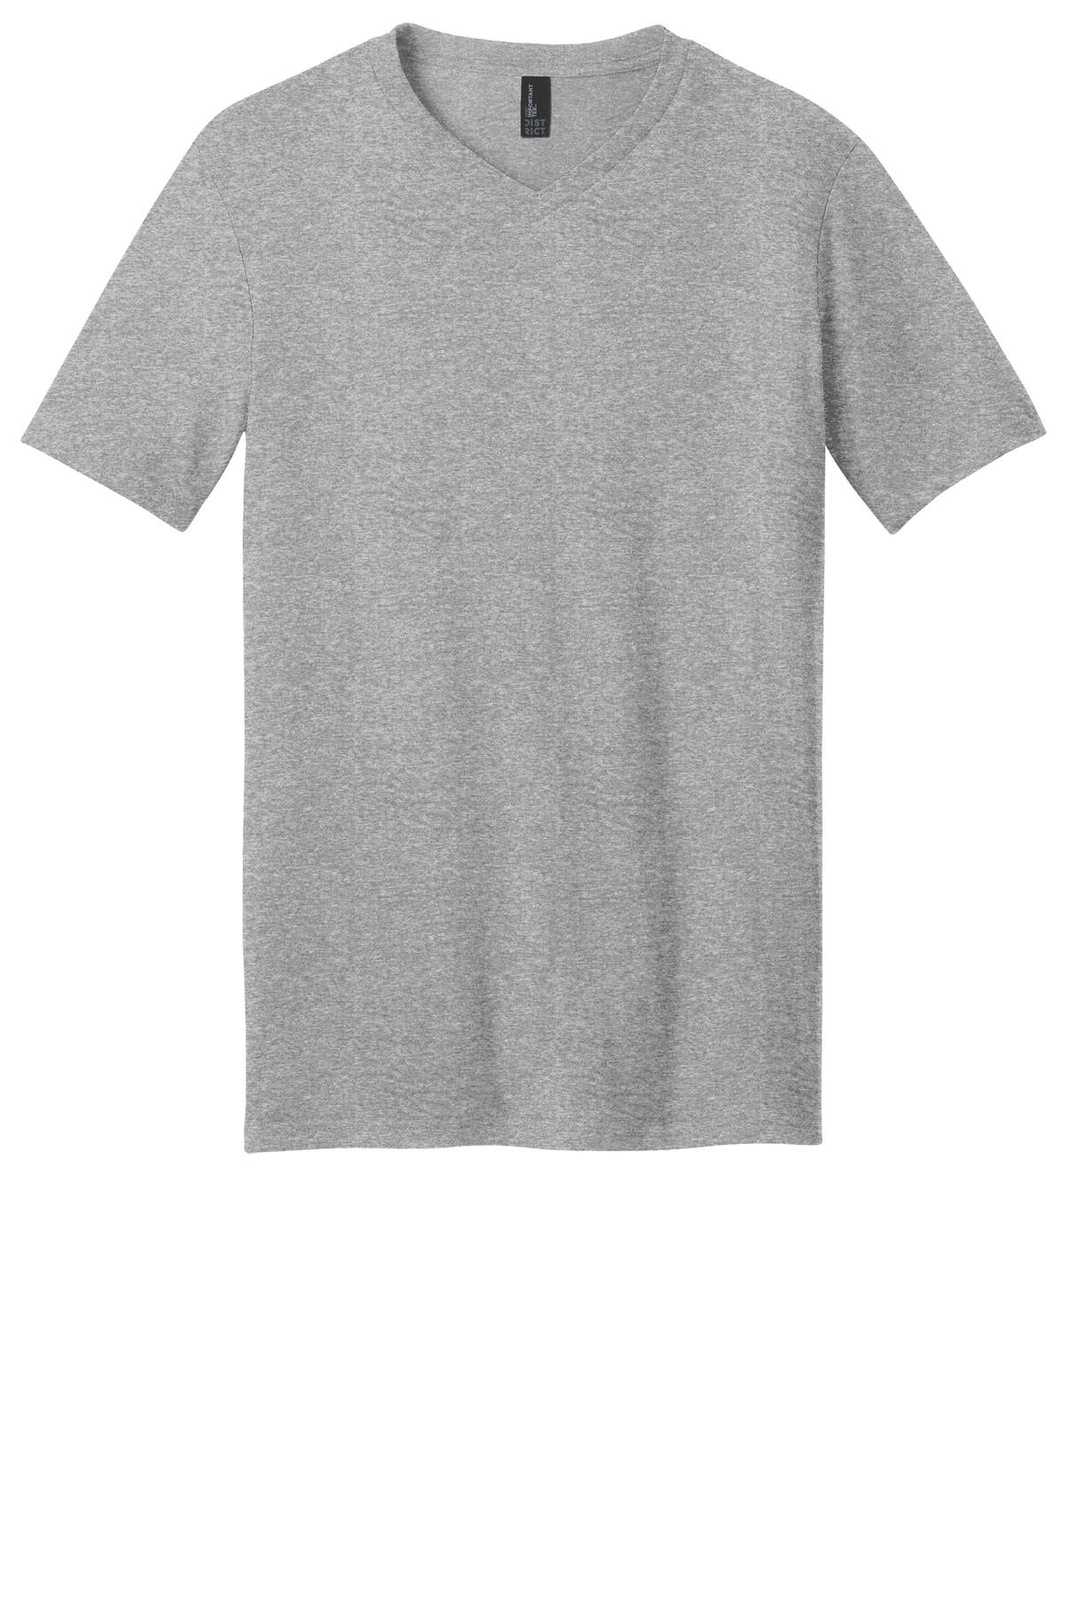 District DT6500 Very Important Tee V-Neck - Light Heather Gray - HIT a Double - 5